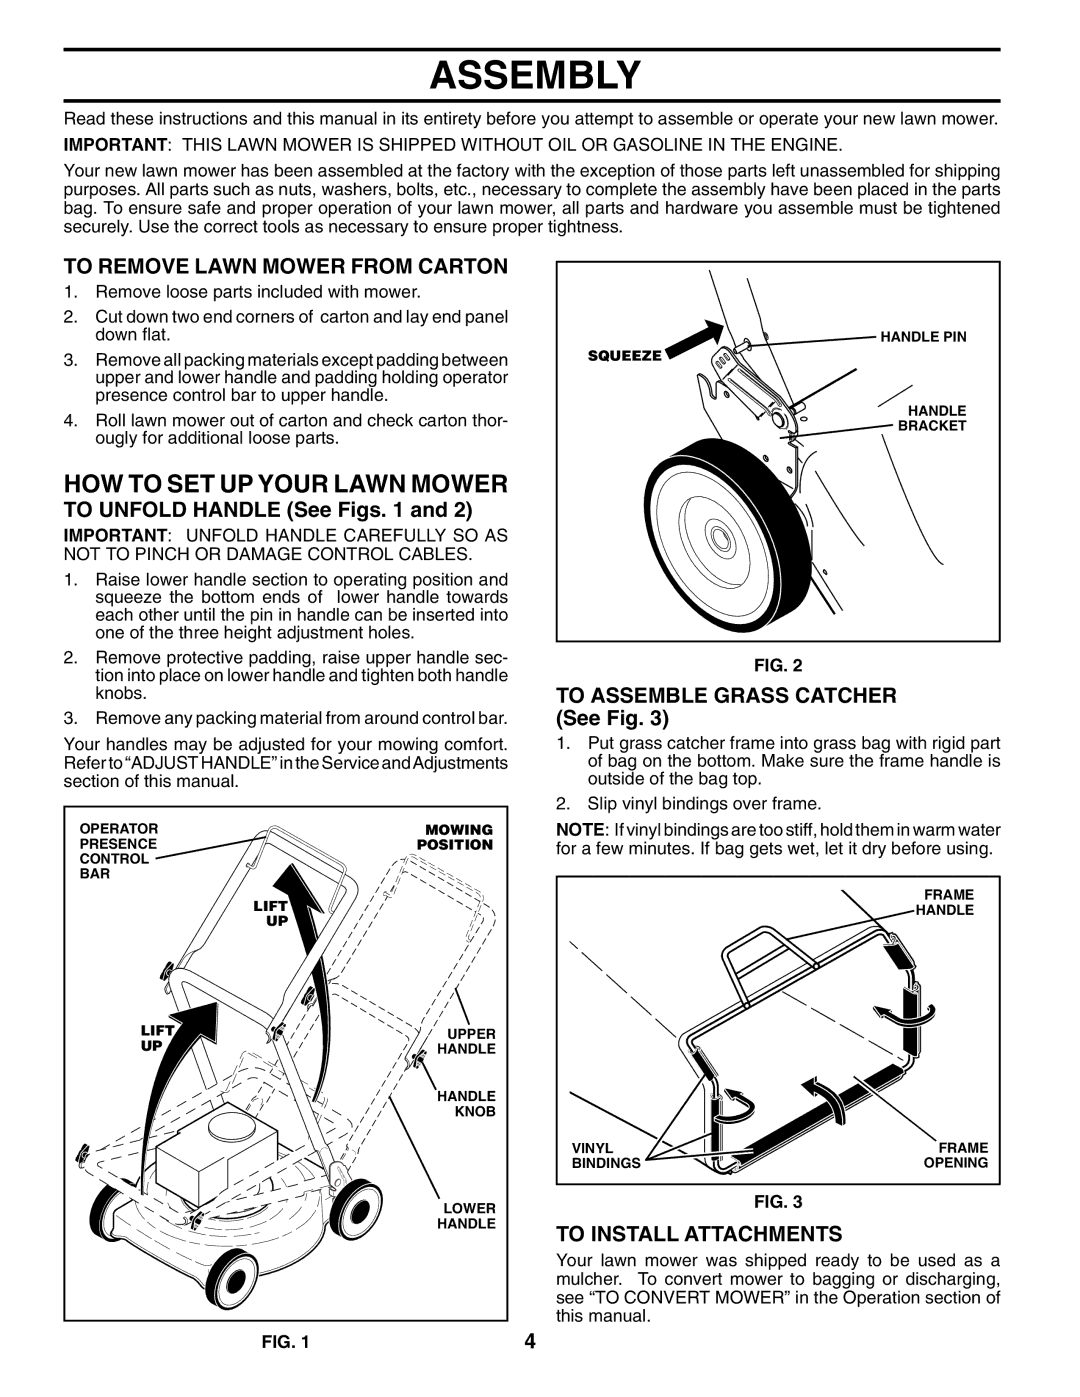 Husqvarna 5521RSX Assembly, HOW to SET UP Your Lawn Mower, To Remove Lawn Mower from Carton, To Install Attachments 